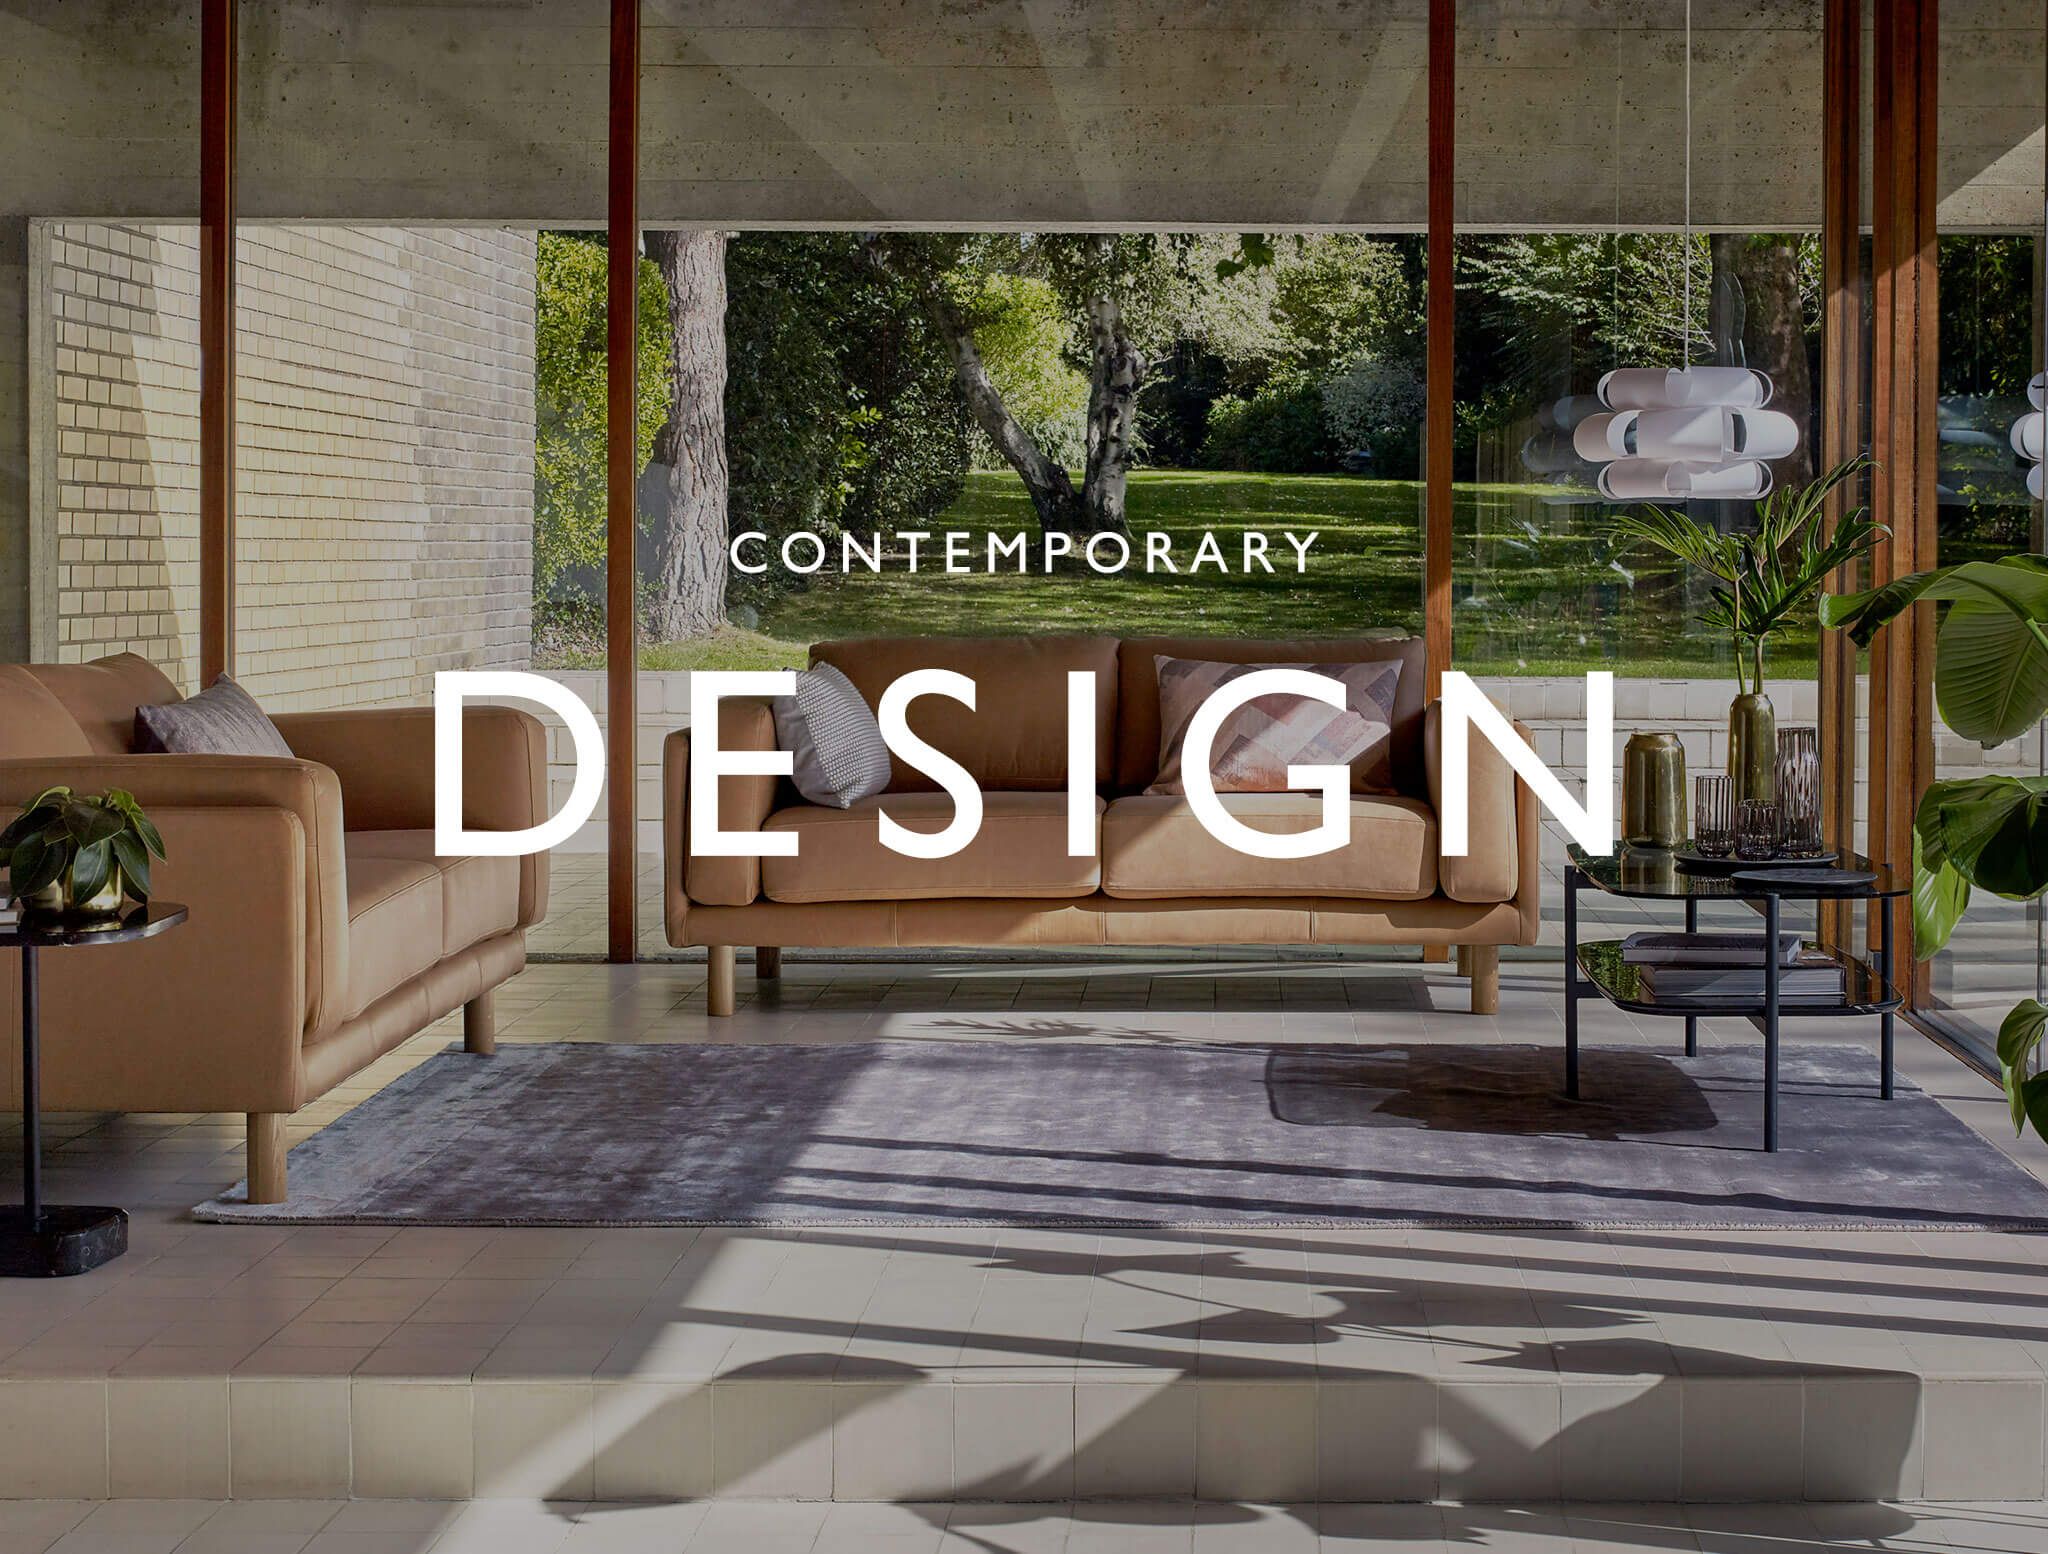 Design Project by John Lewis – Contemporary Design